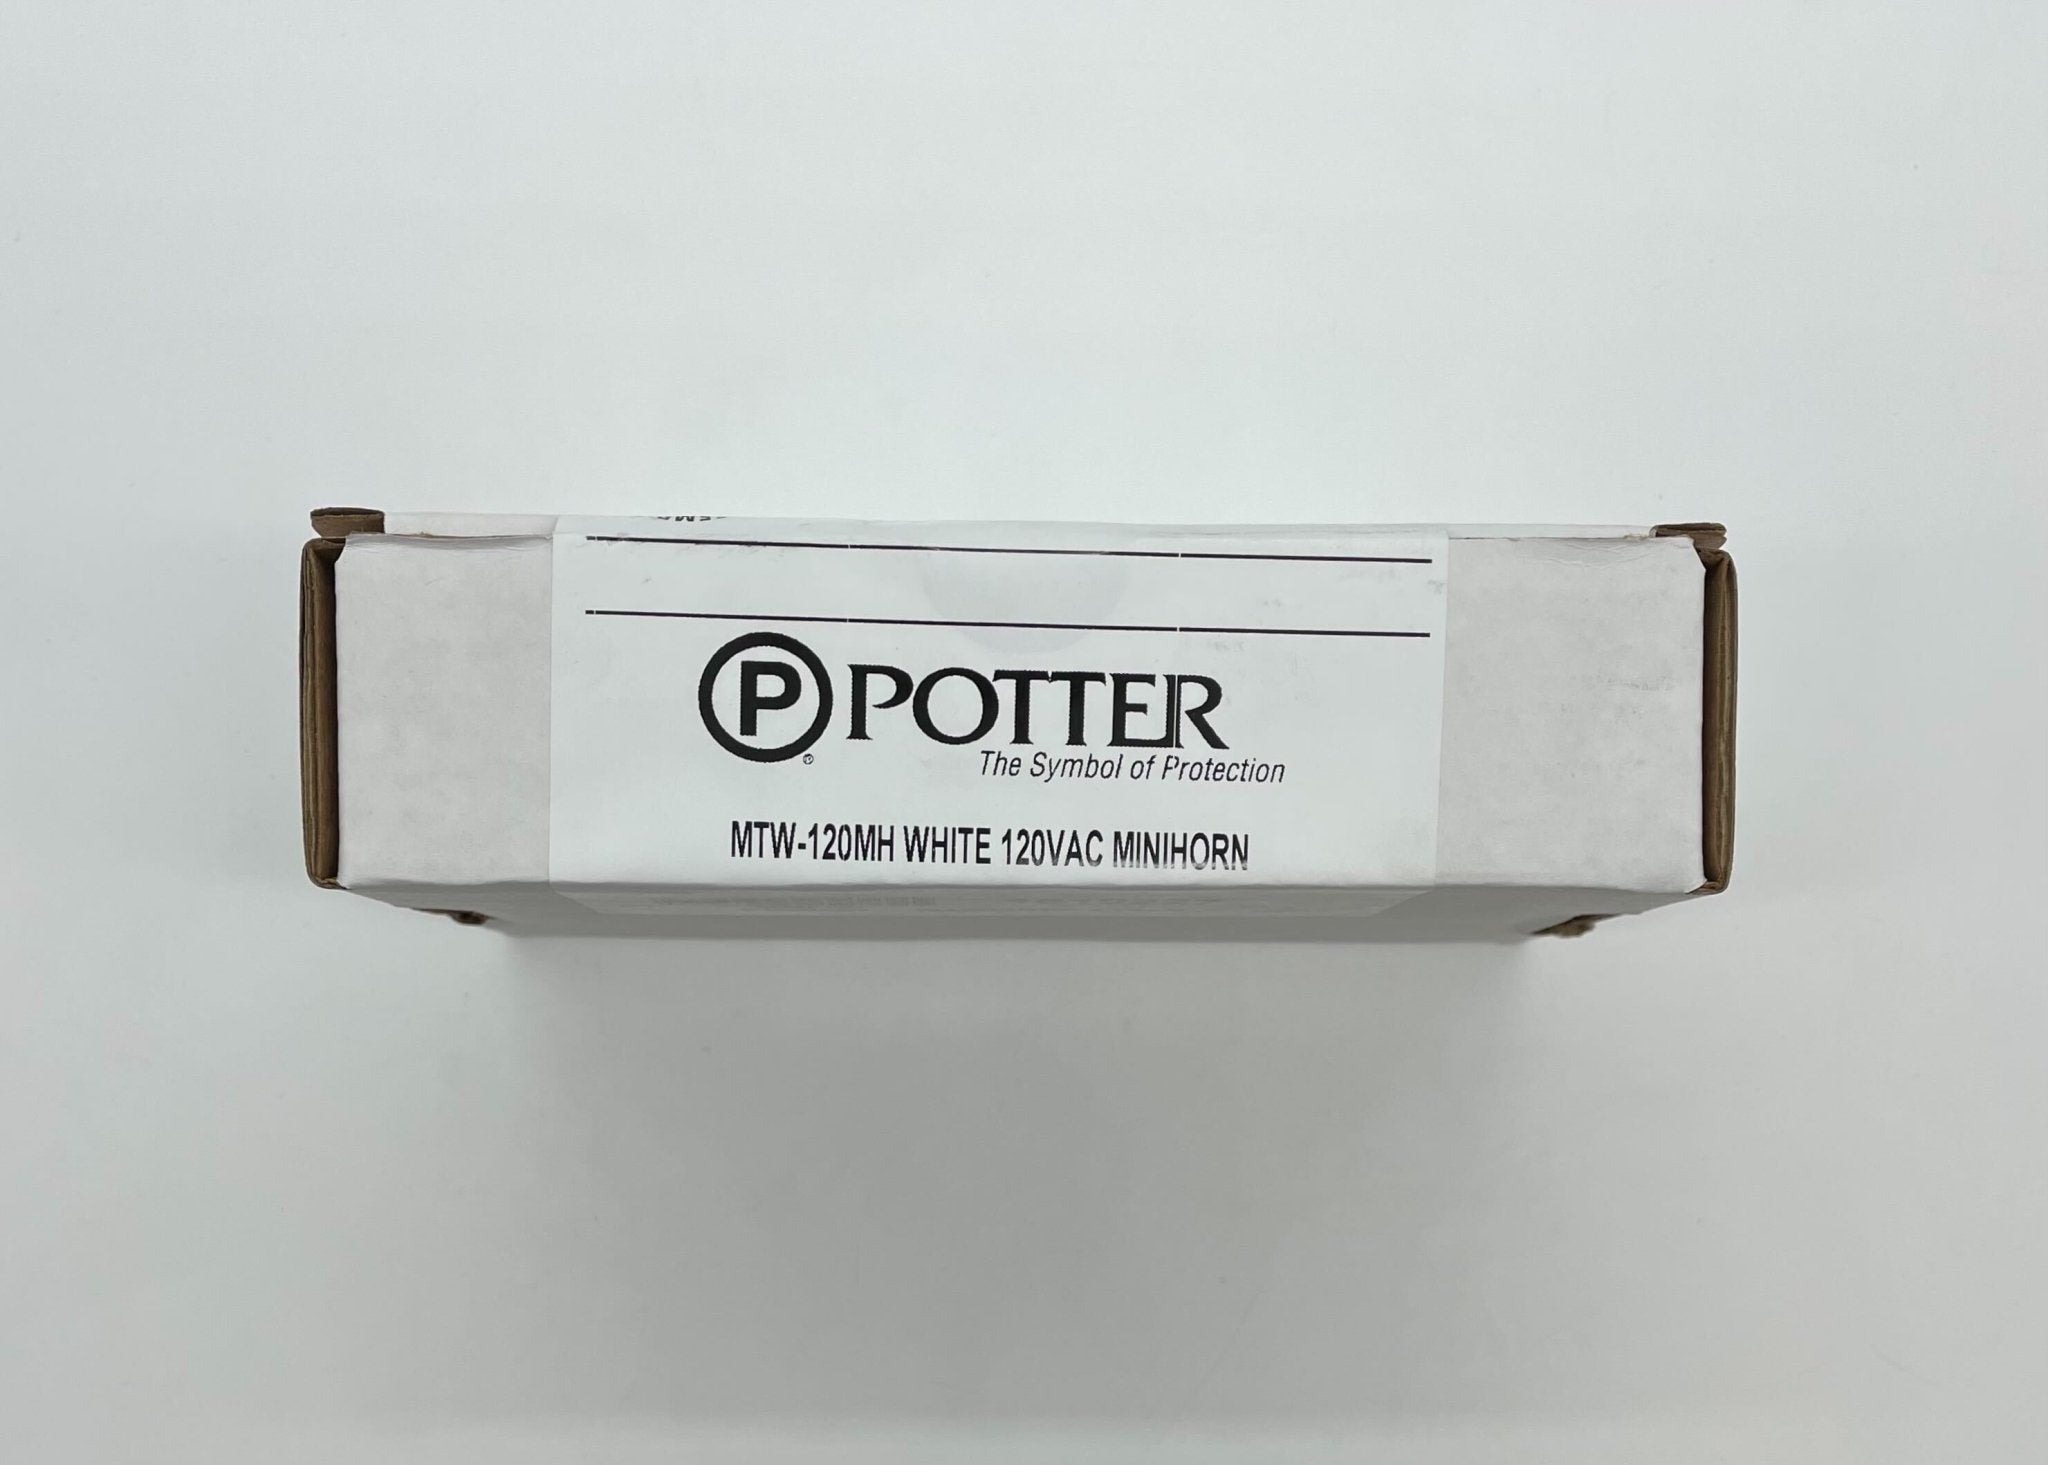 Potter MTW-120MH - The Fire Alarm Supplier